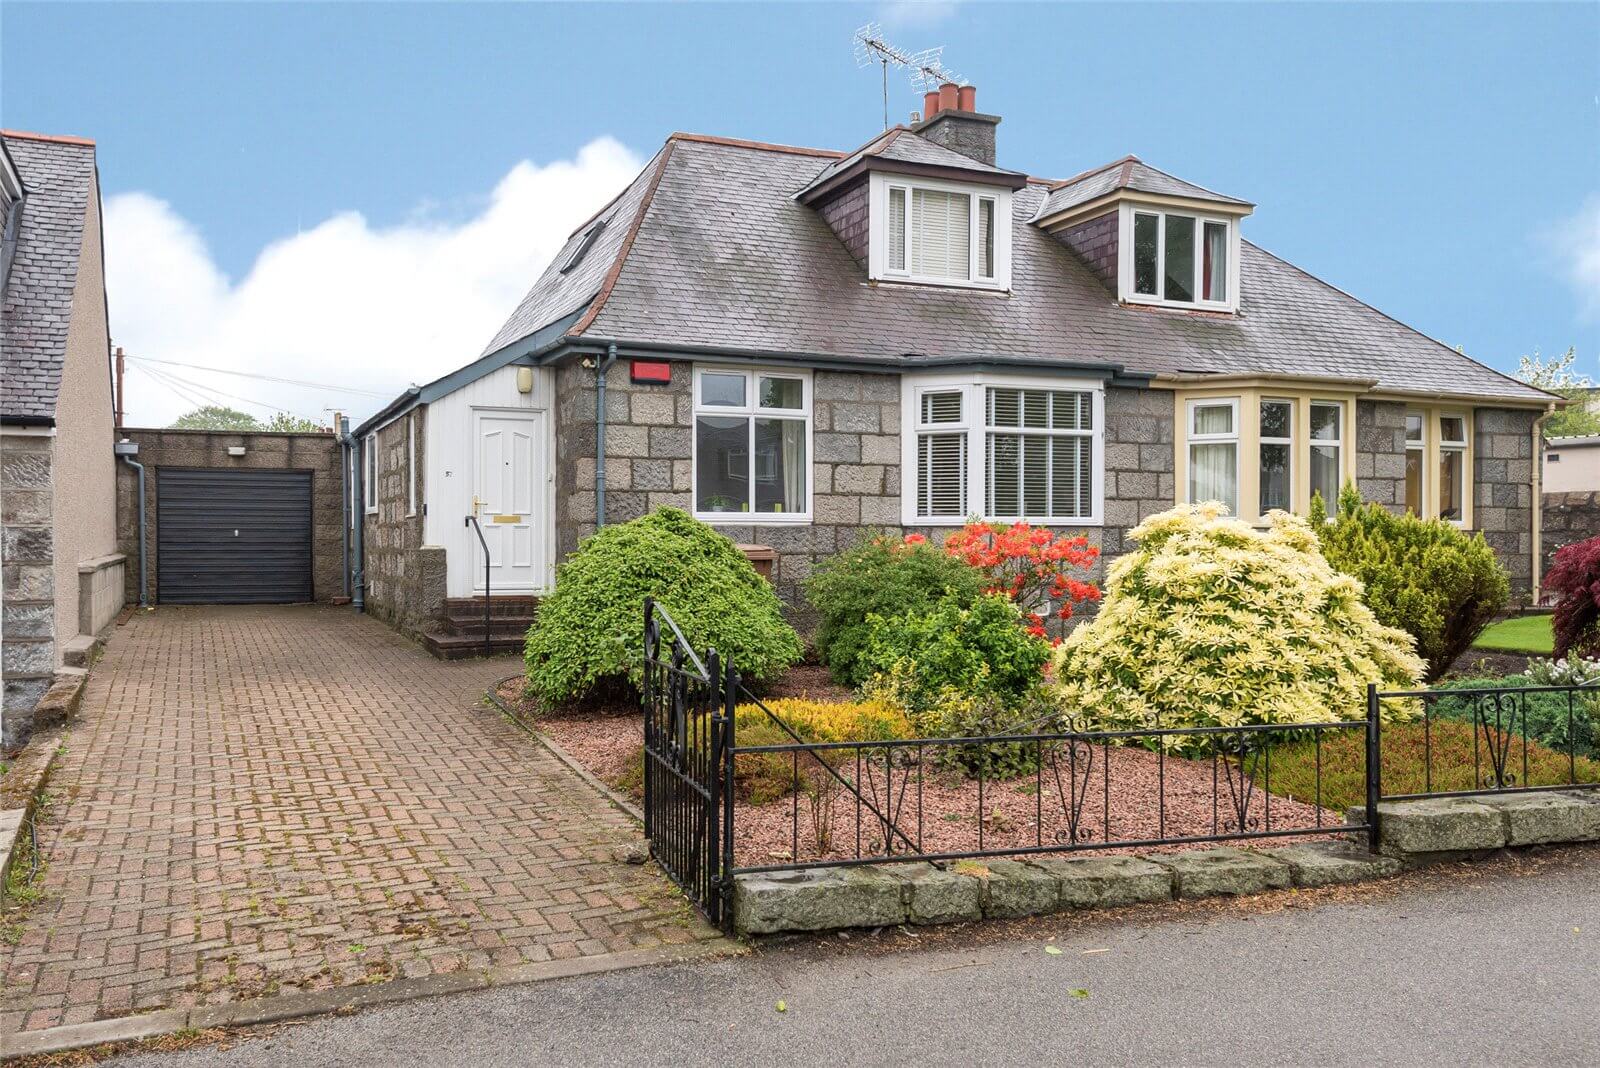 Our latest properties for sale and to let (3rd June 2019)